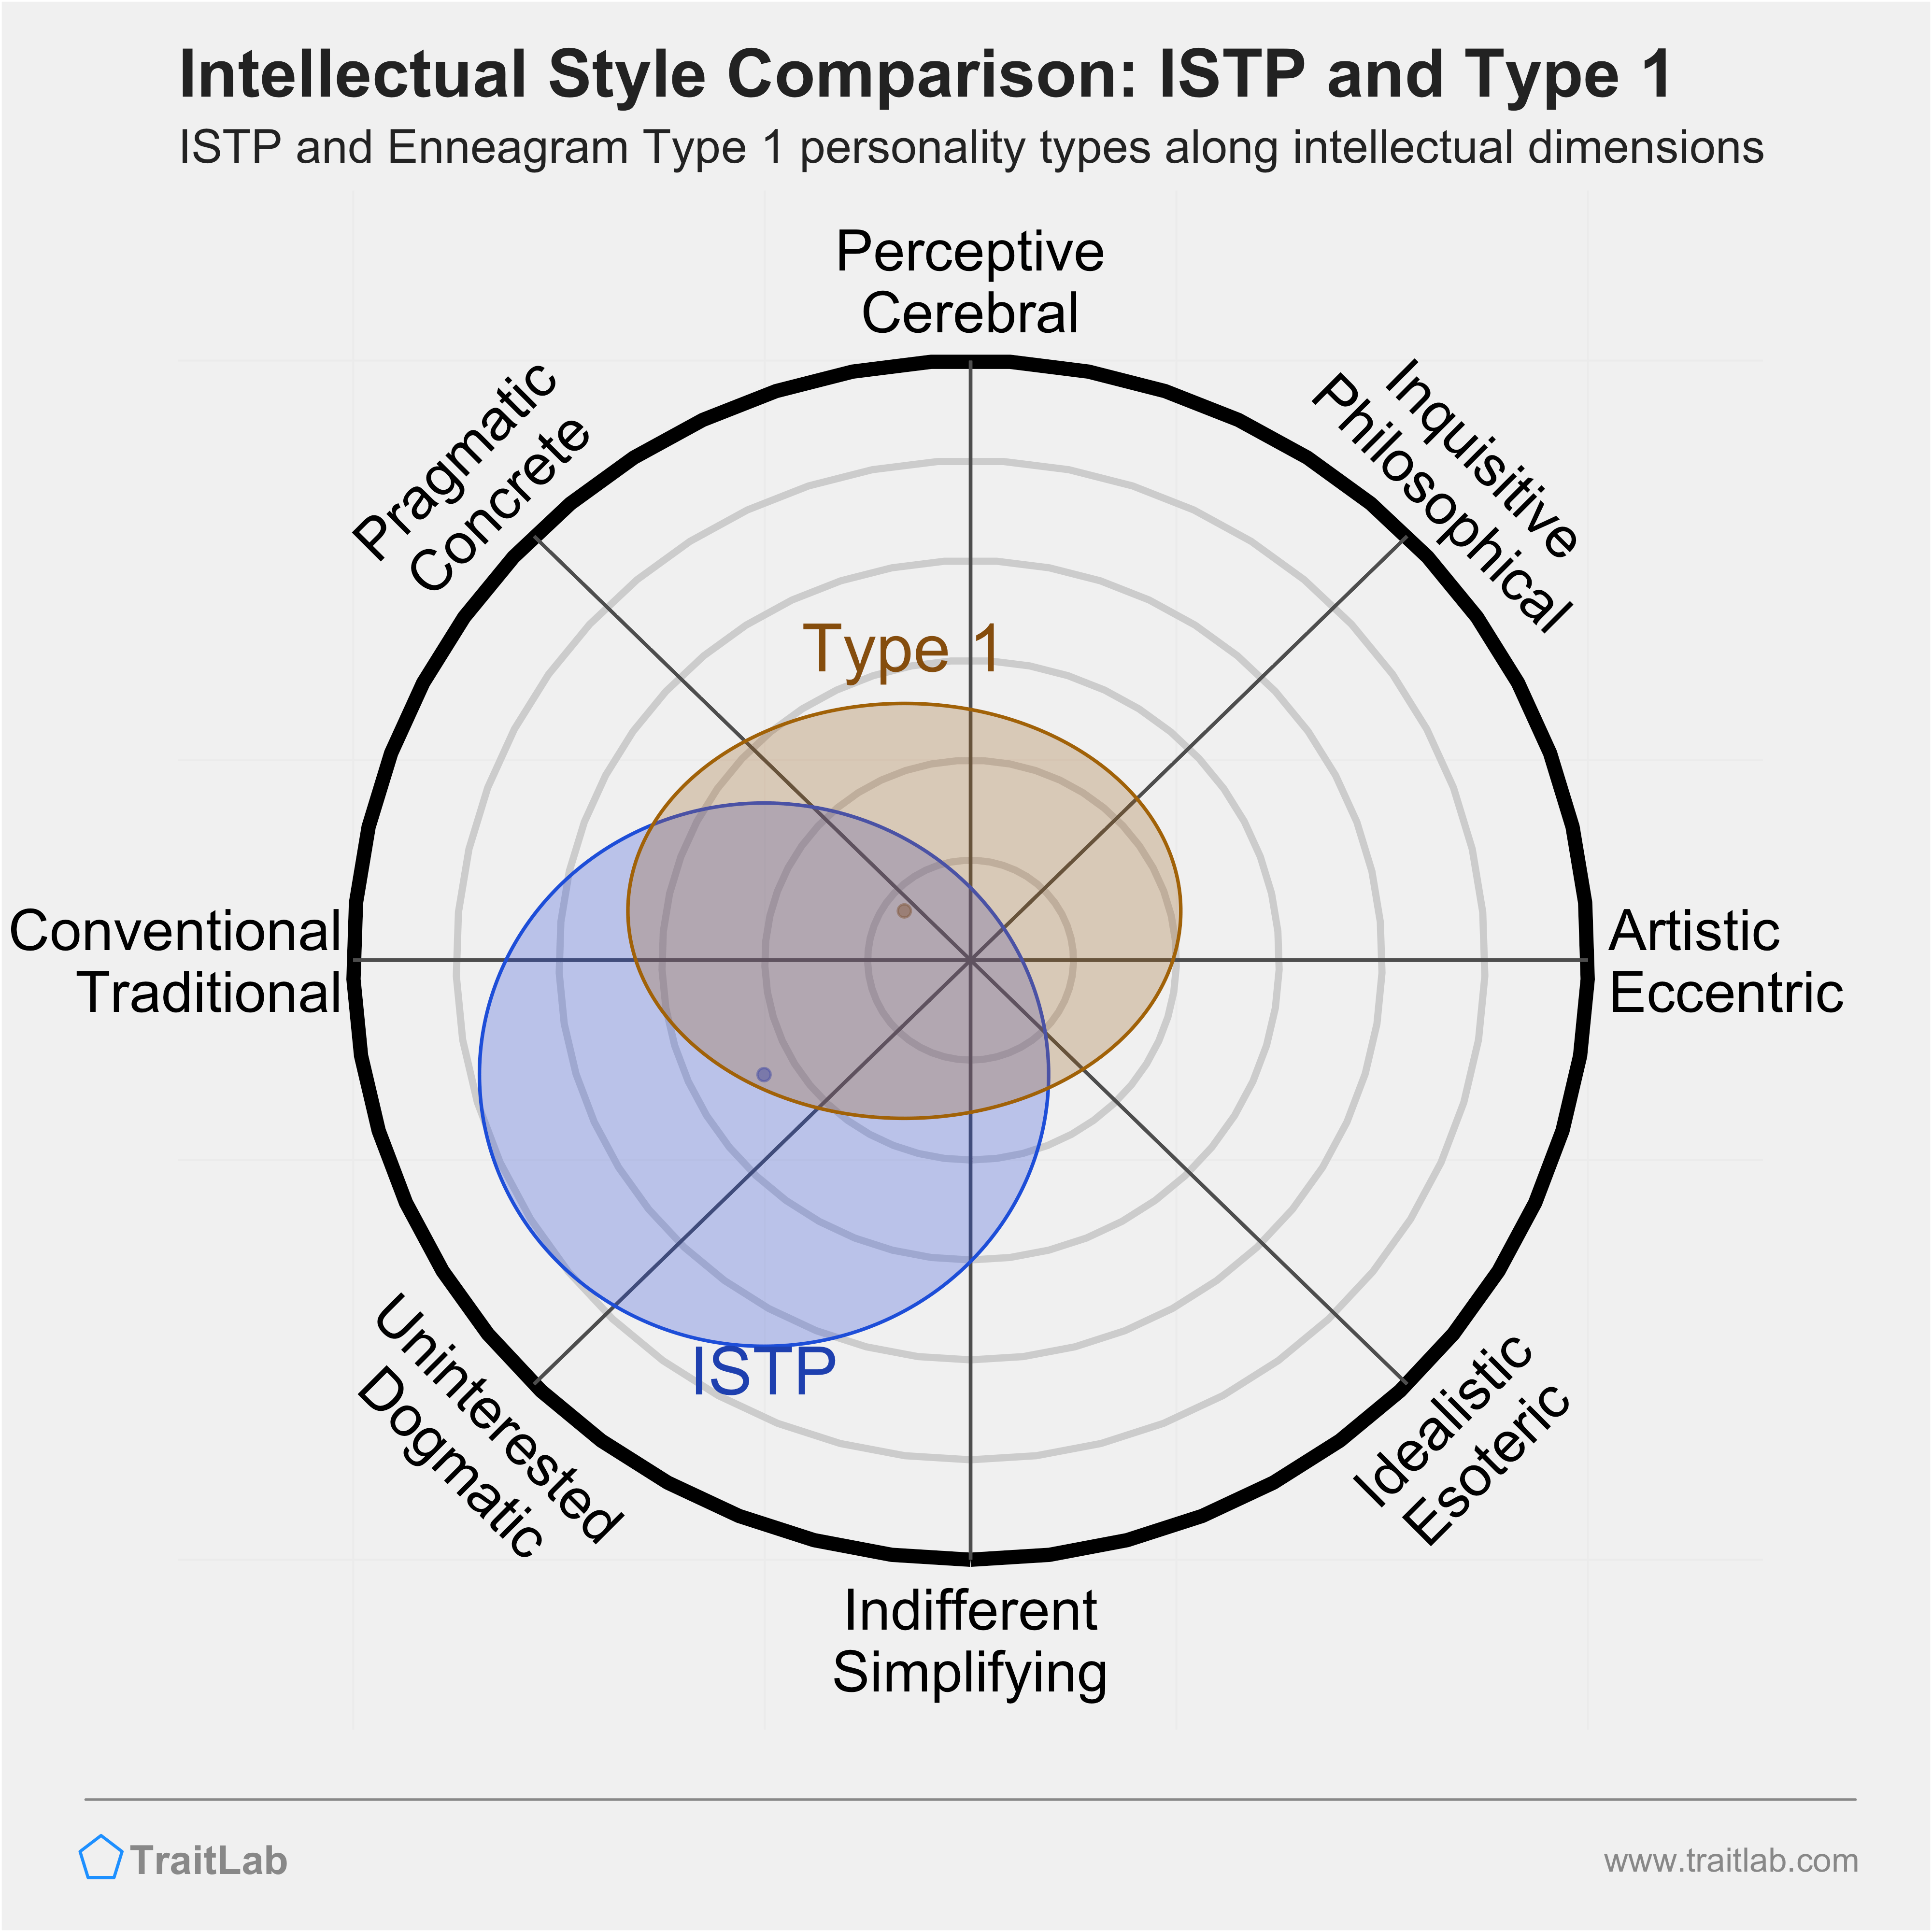 ISTP and Type 1 comparison across intellectual dimensions